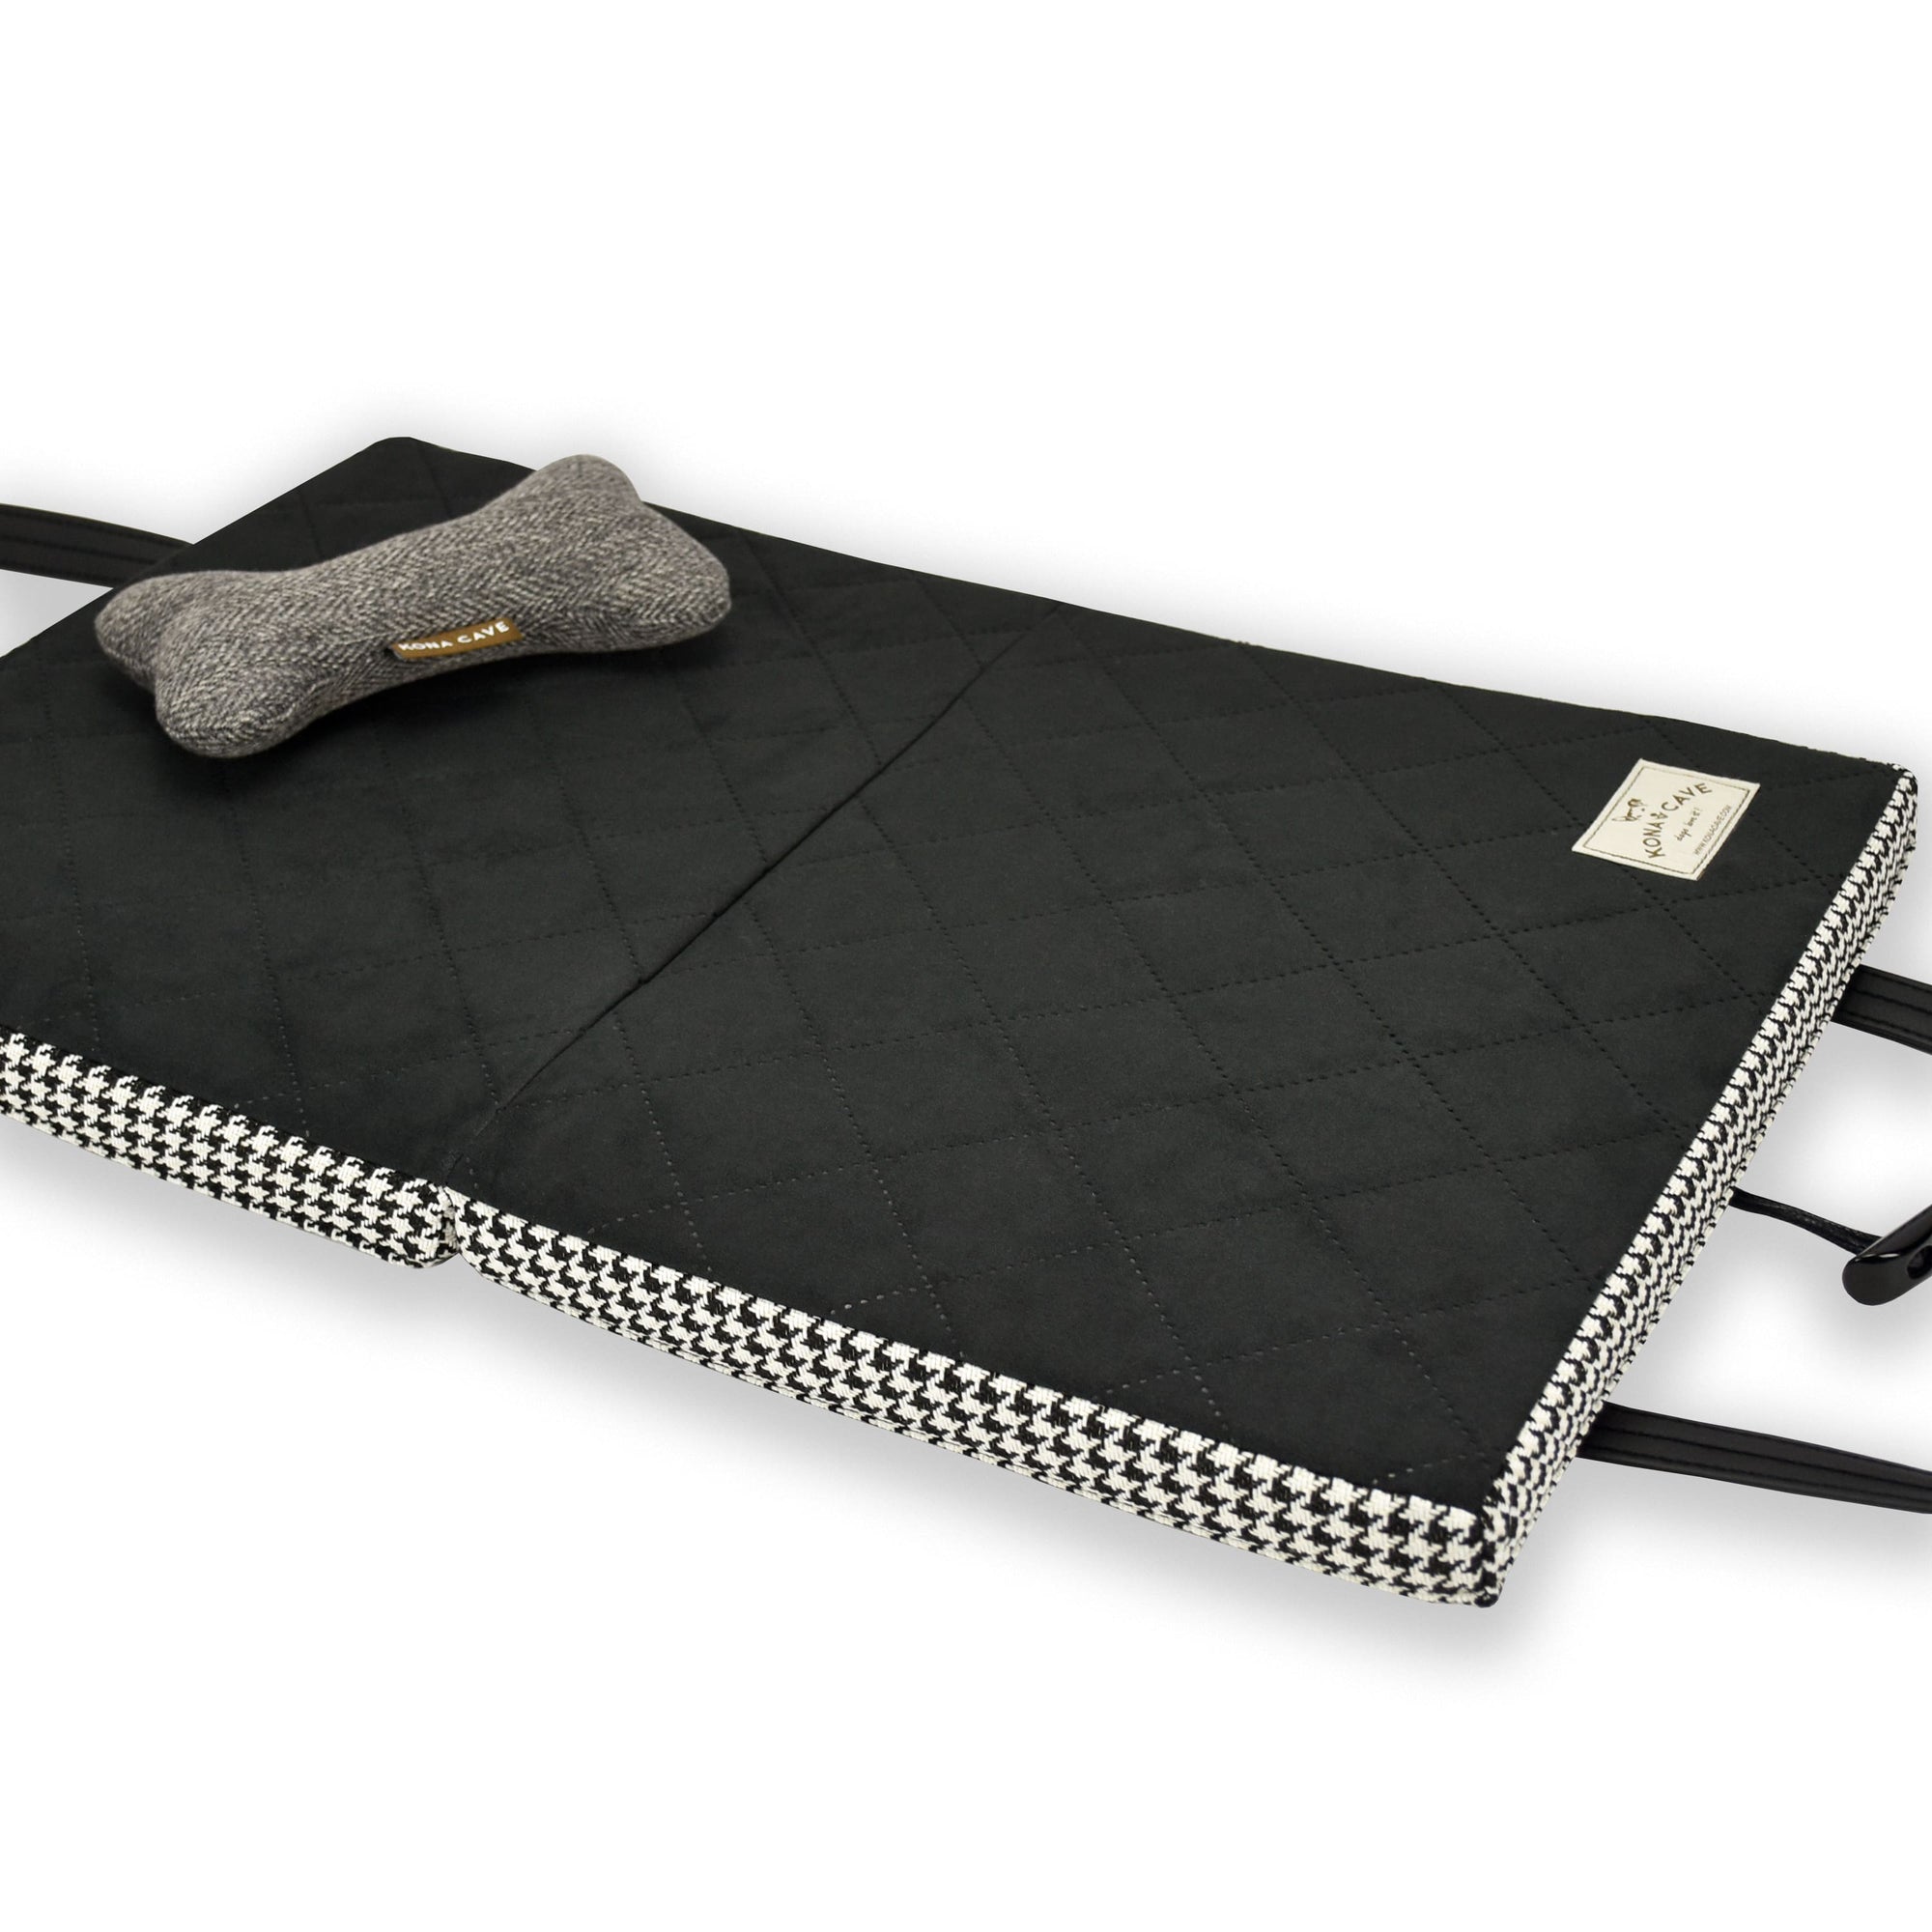 KONA CAVE® luxury Travel Dog Bed - Black and White Houndstooth with Black Quilted Alcantara faux suede lining, with front pocket for on-the-go dog essentials, vegan-leather shoulder straps, and toggle closure.  Portable, folded dog mat for restaurants, outside and hotels. City chic carried dog bed . Luxury toy dog bone. 